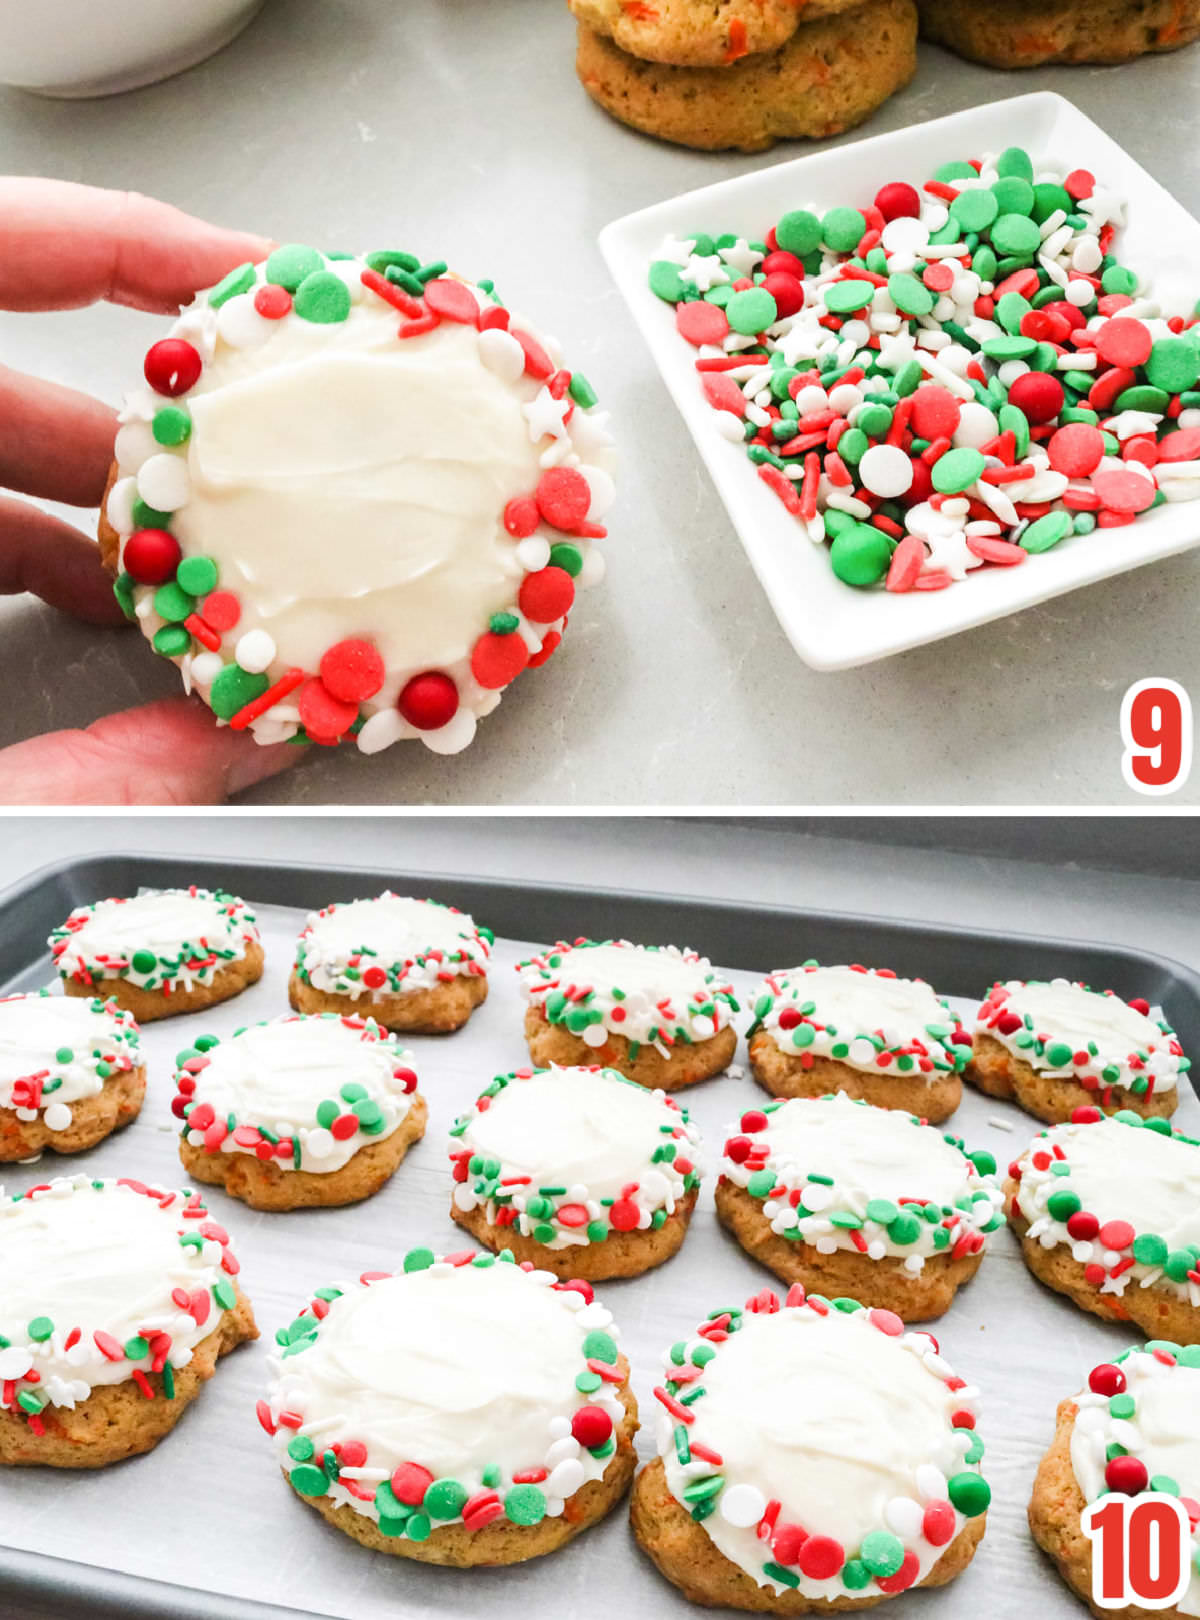 Collage image showing how to frost and decorate the Christmas Carrot Cake Cookies.